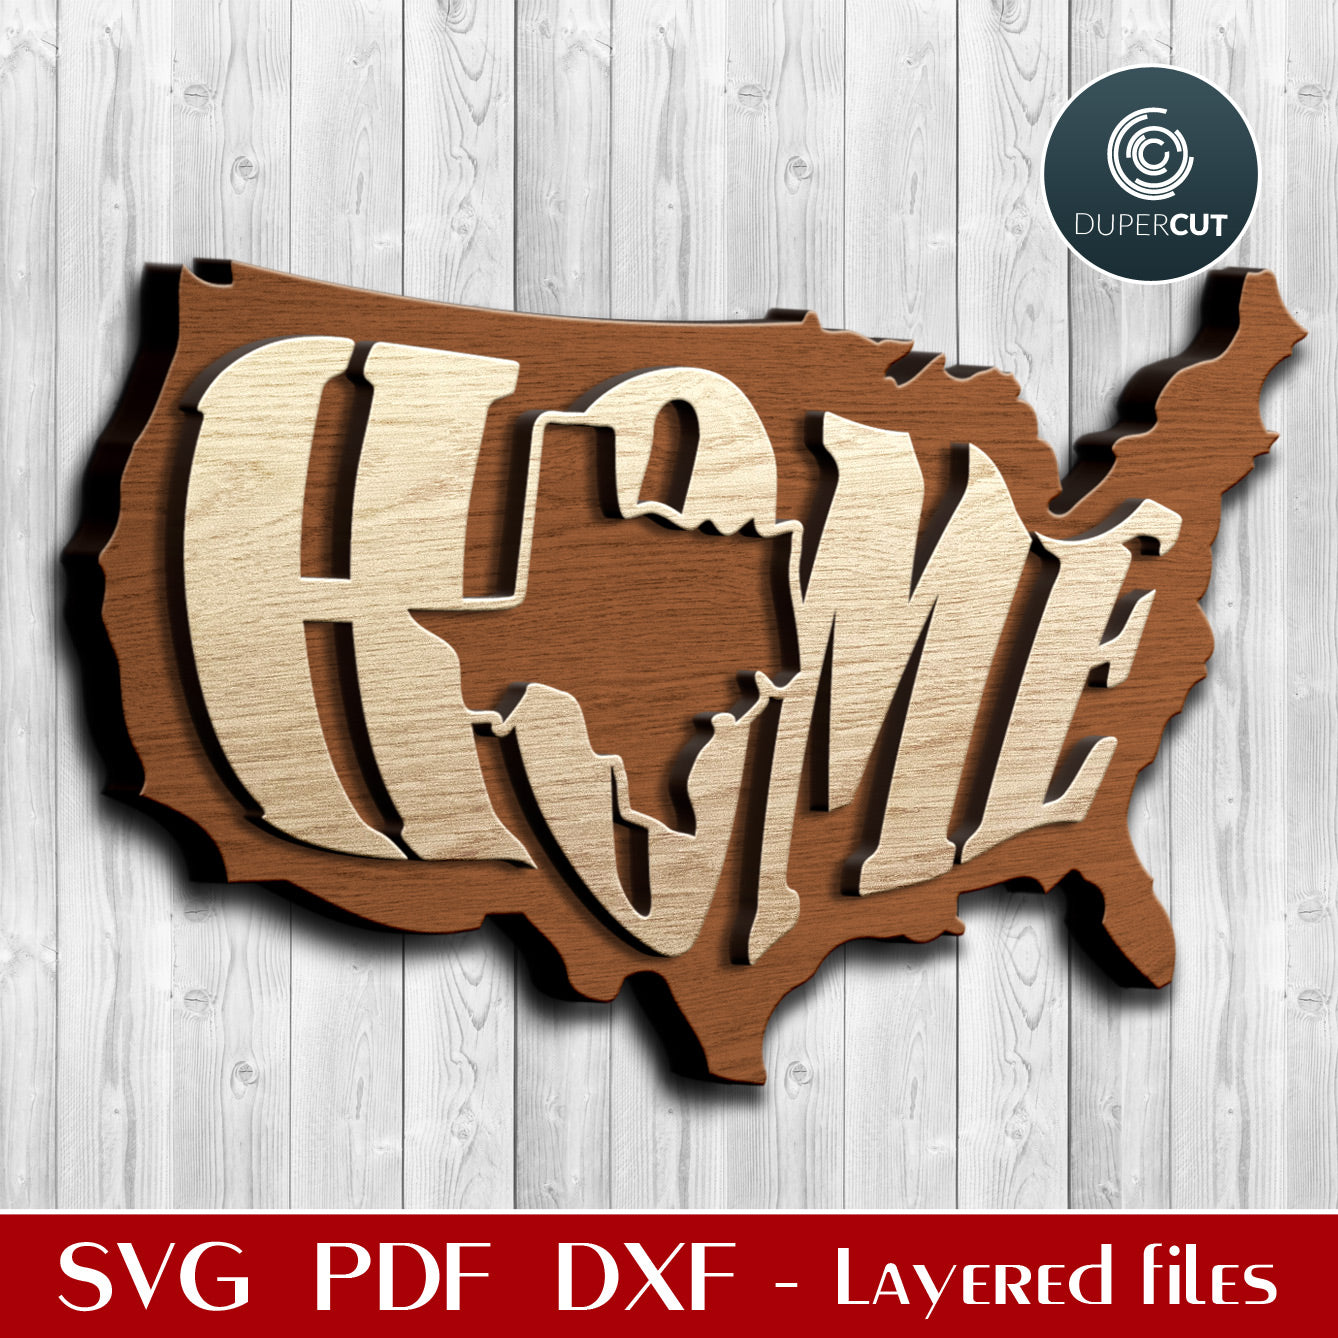 Map of the United States Texas HOME design SVG layered cutting files for Glowfroge, Cricut, Silhouette, CNC plasma machines by DuperCut.com